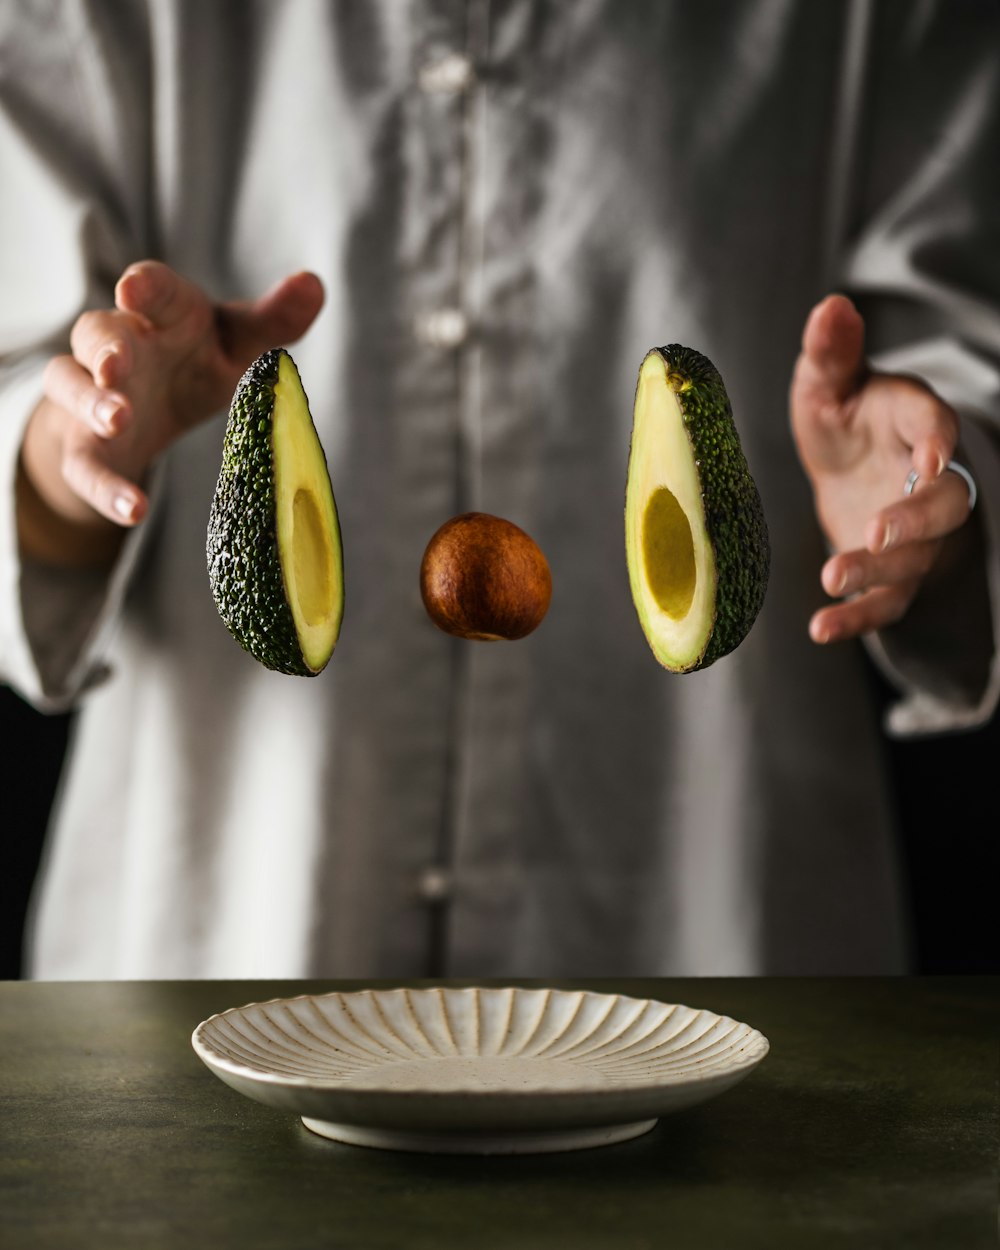 an avocado being cut in half by a person